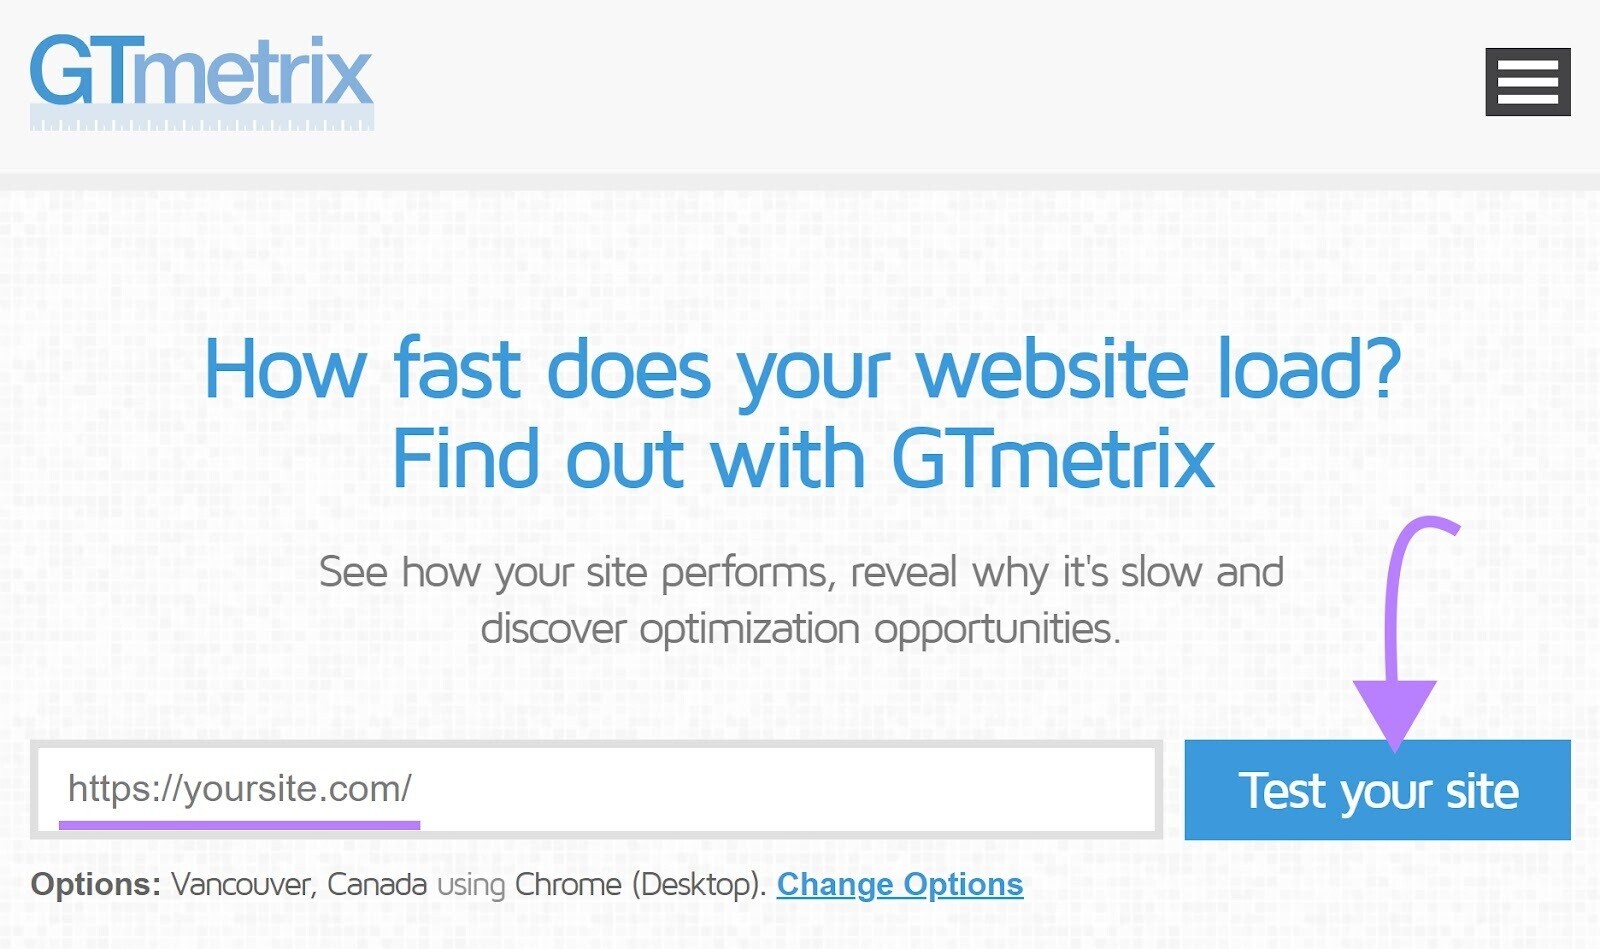 GTmetrix homepage with title "How fast does your website load" Find out with GTmetrix"